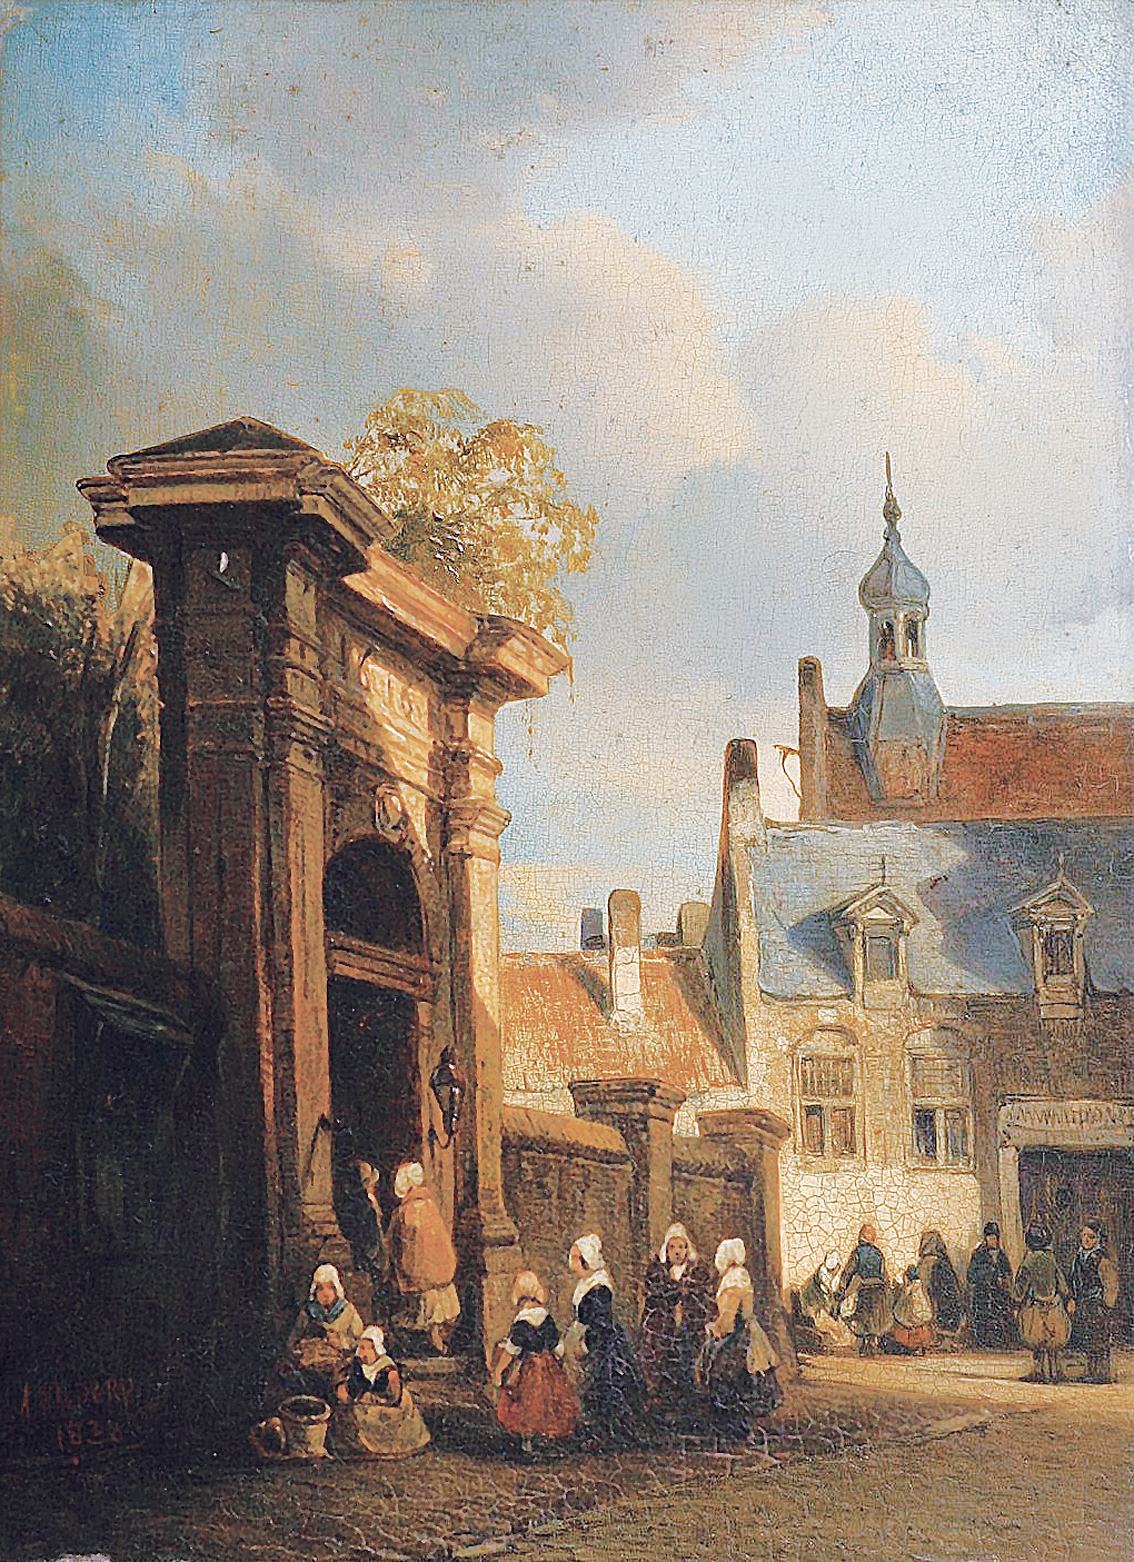 "A partial prospect of Den Haag, with figures"